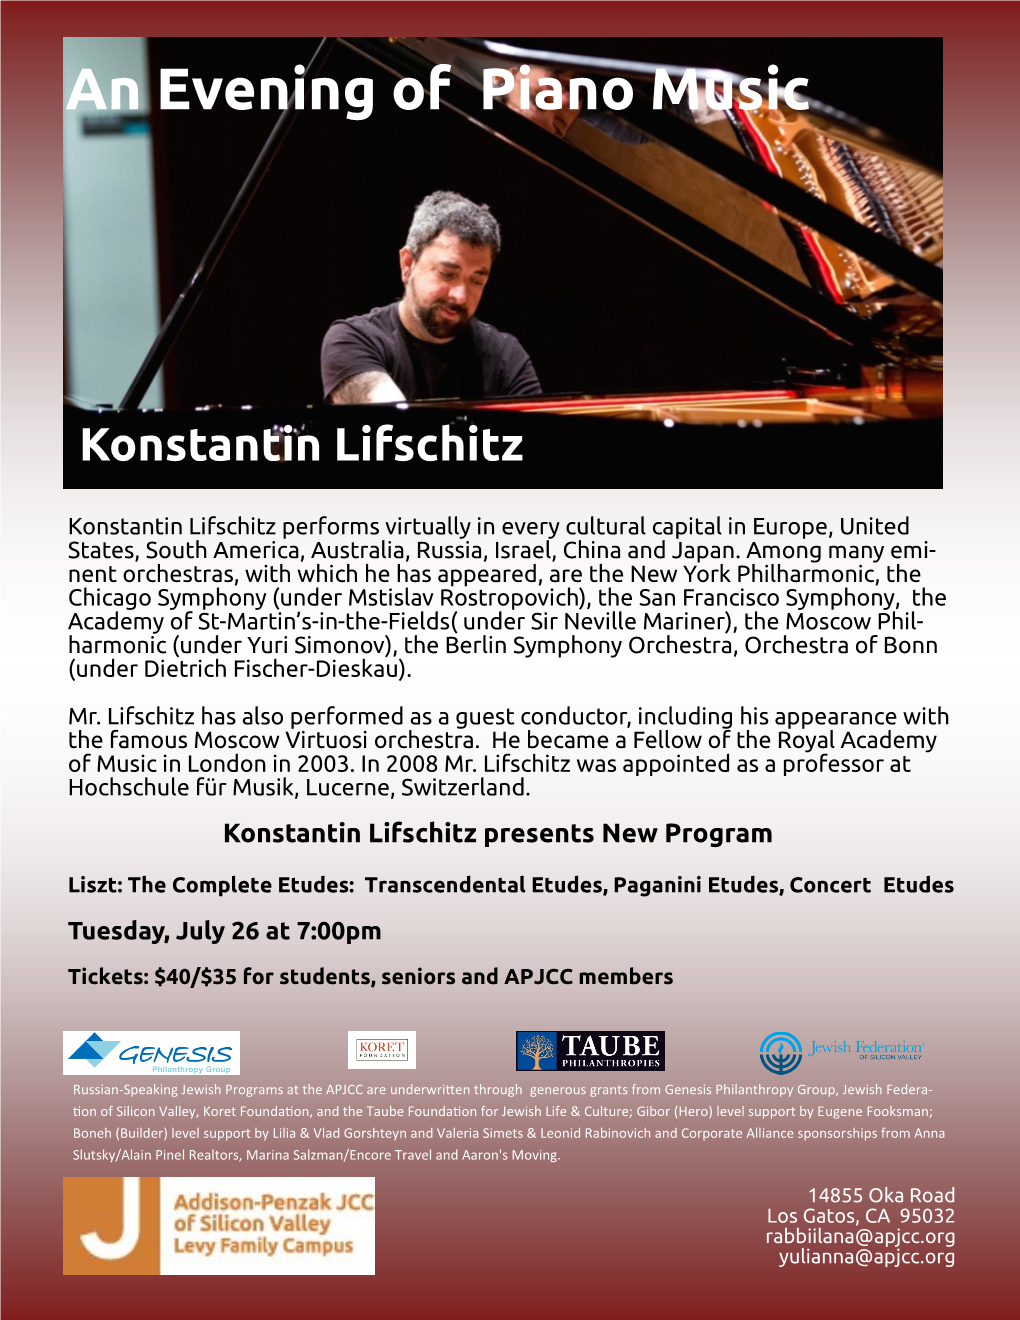 An Evening of Piano Music